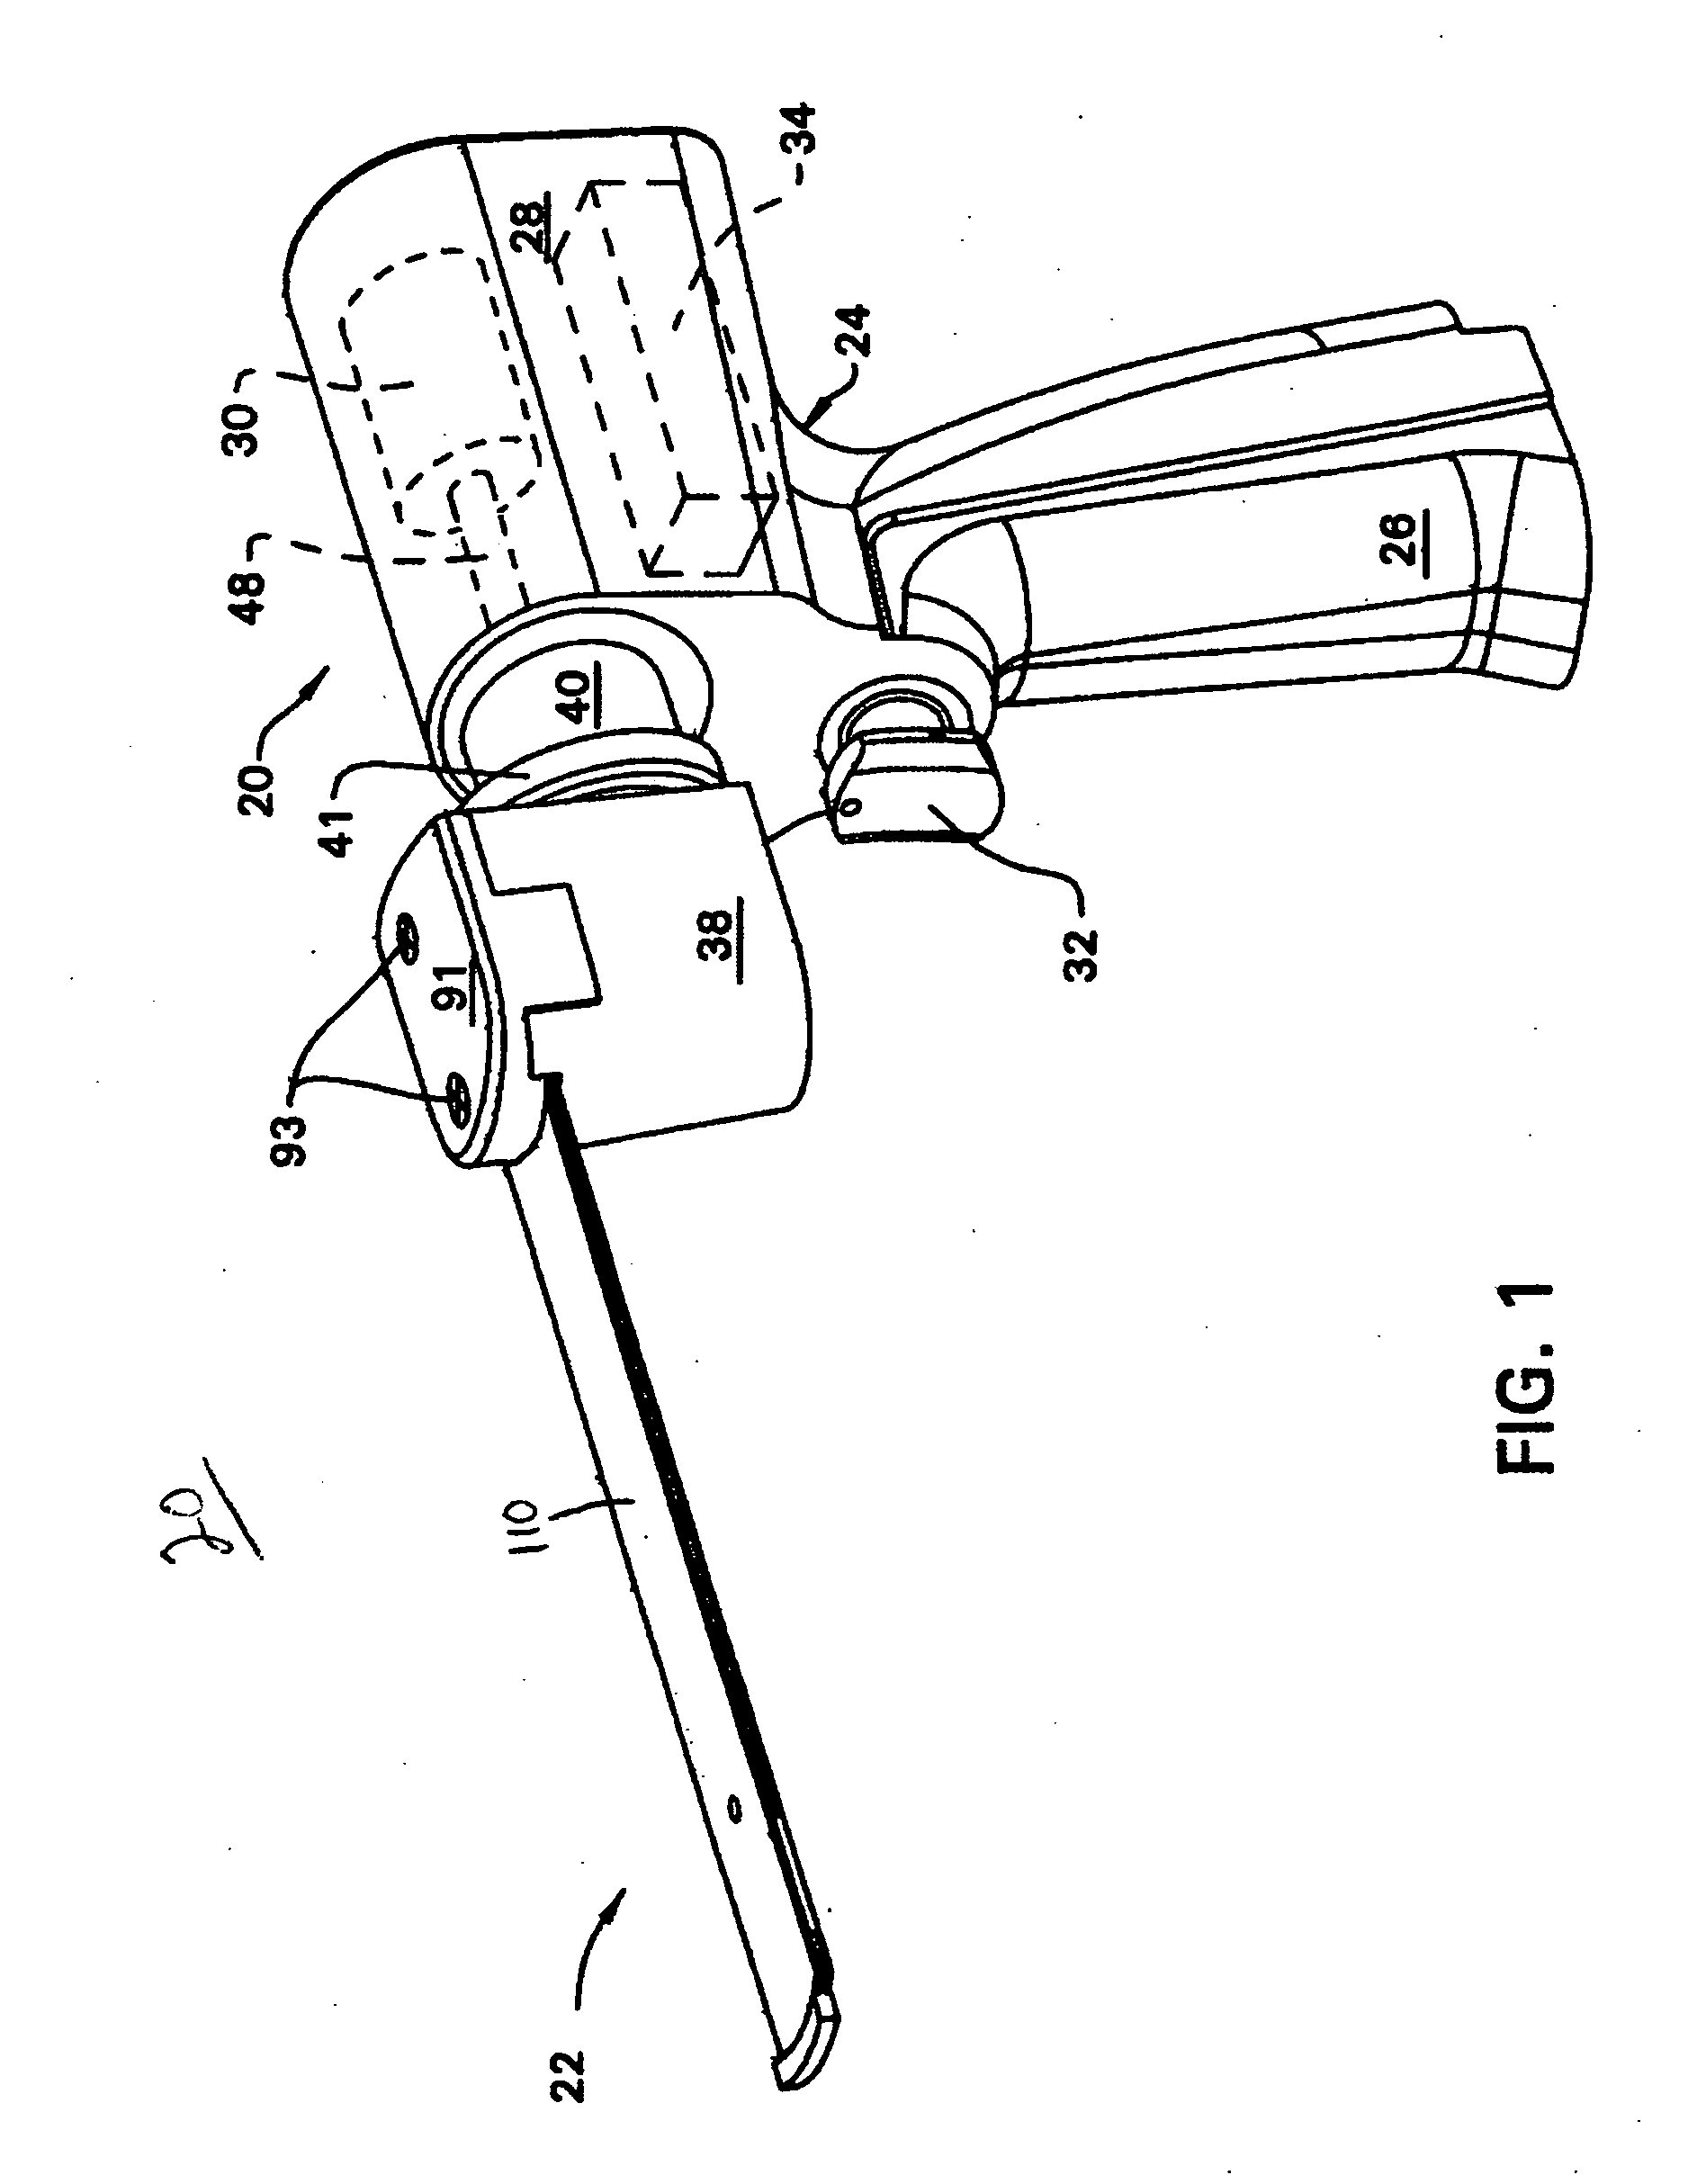 System for preparing bone for receiving an implant